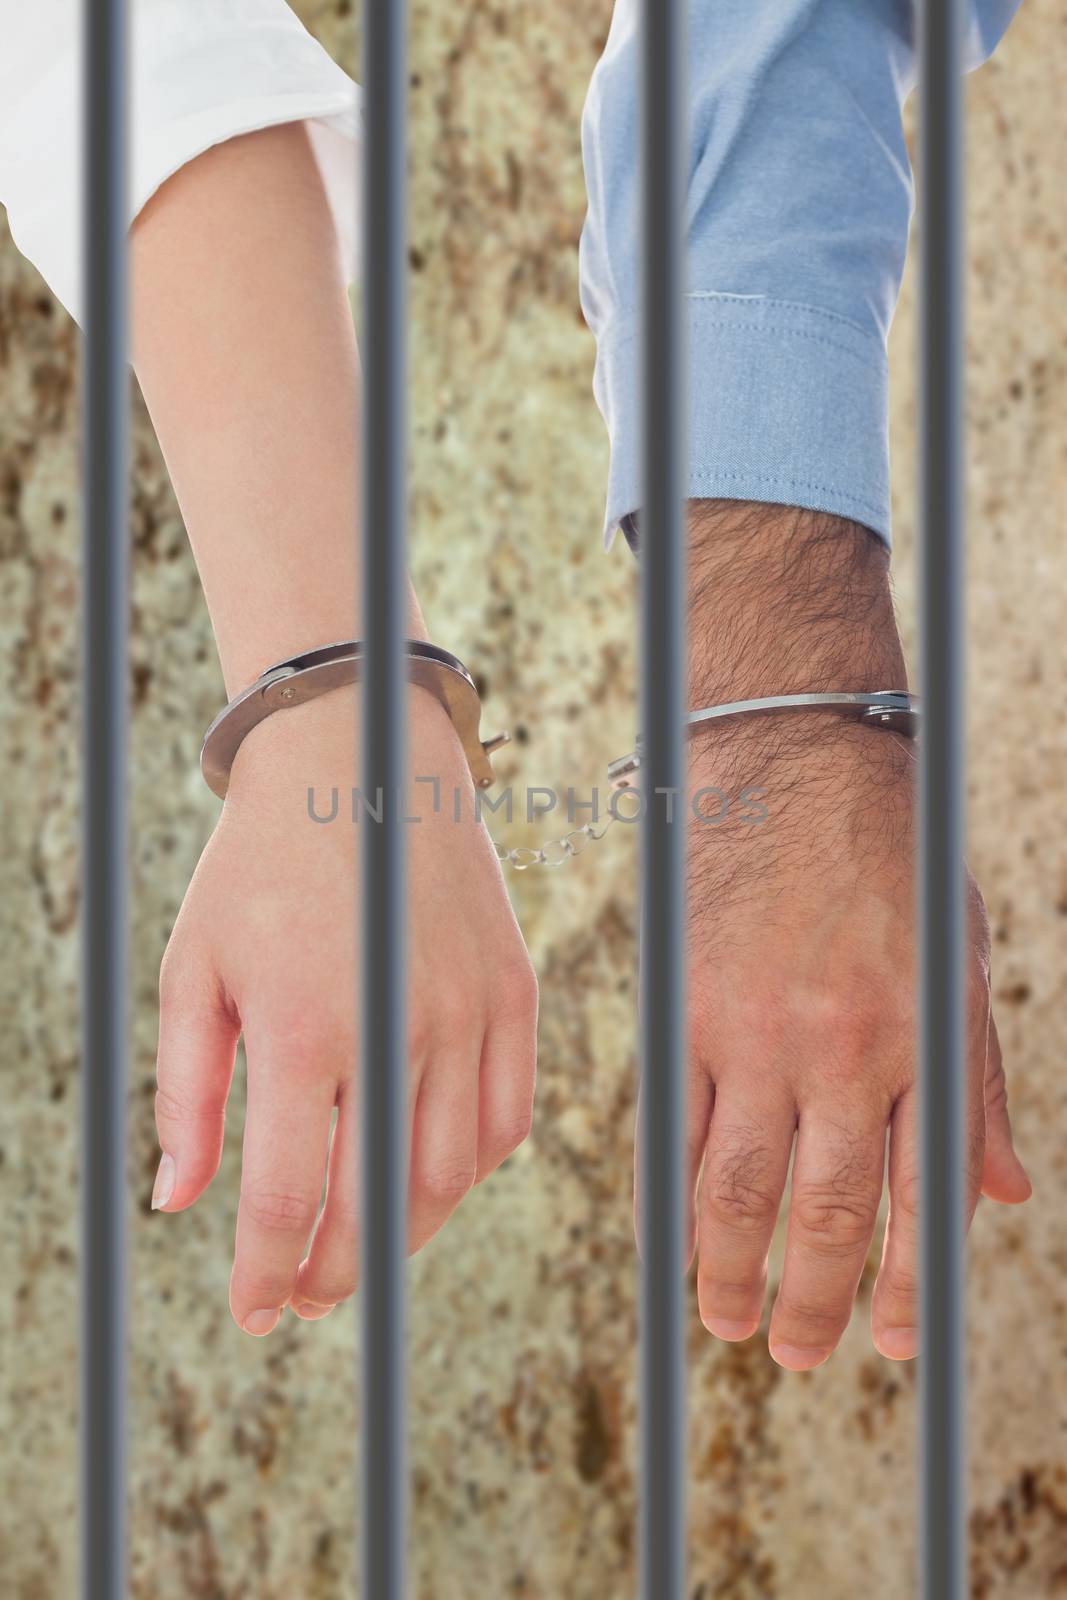 Closeup of handcuffed business people against dirty old wall background